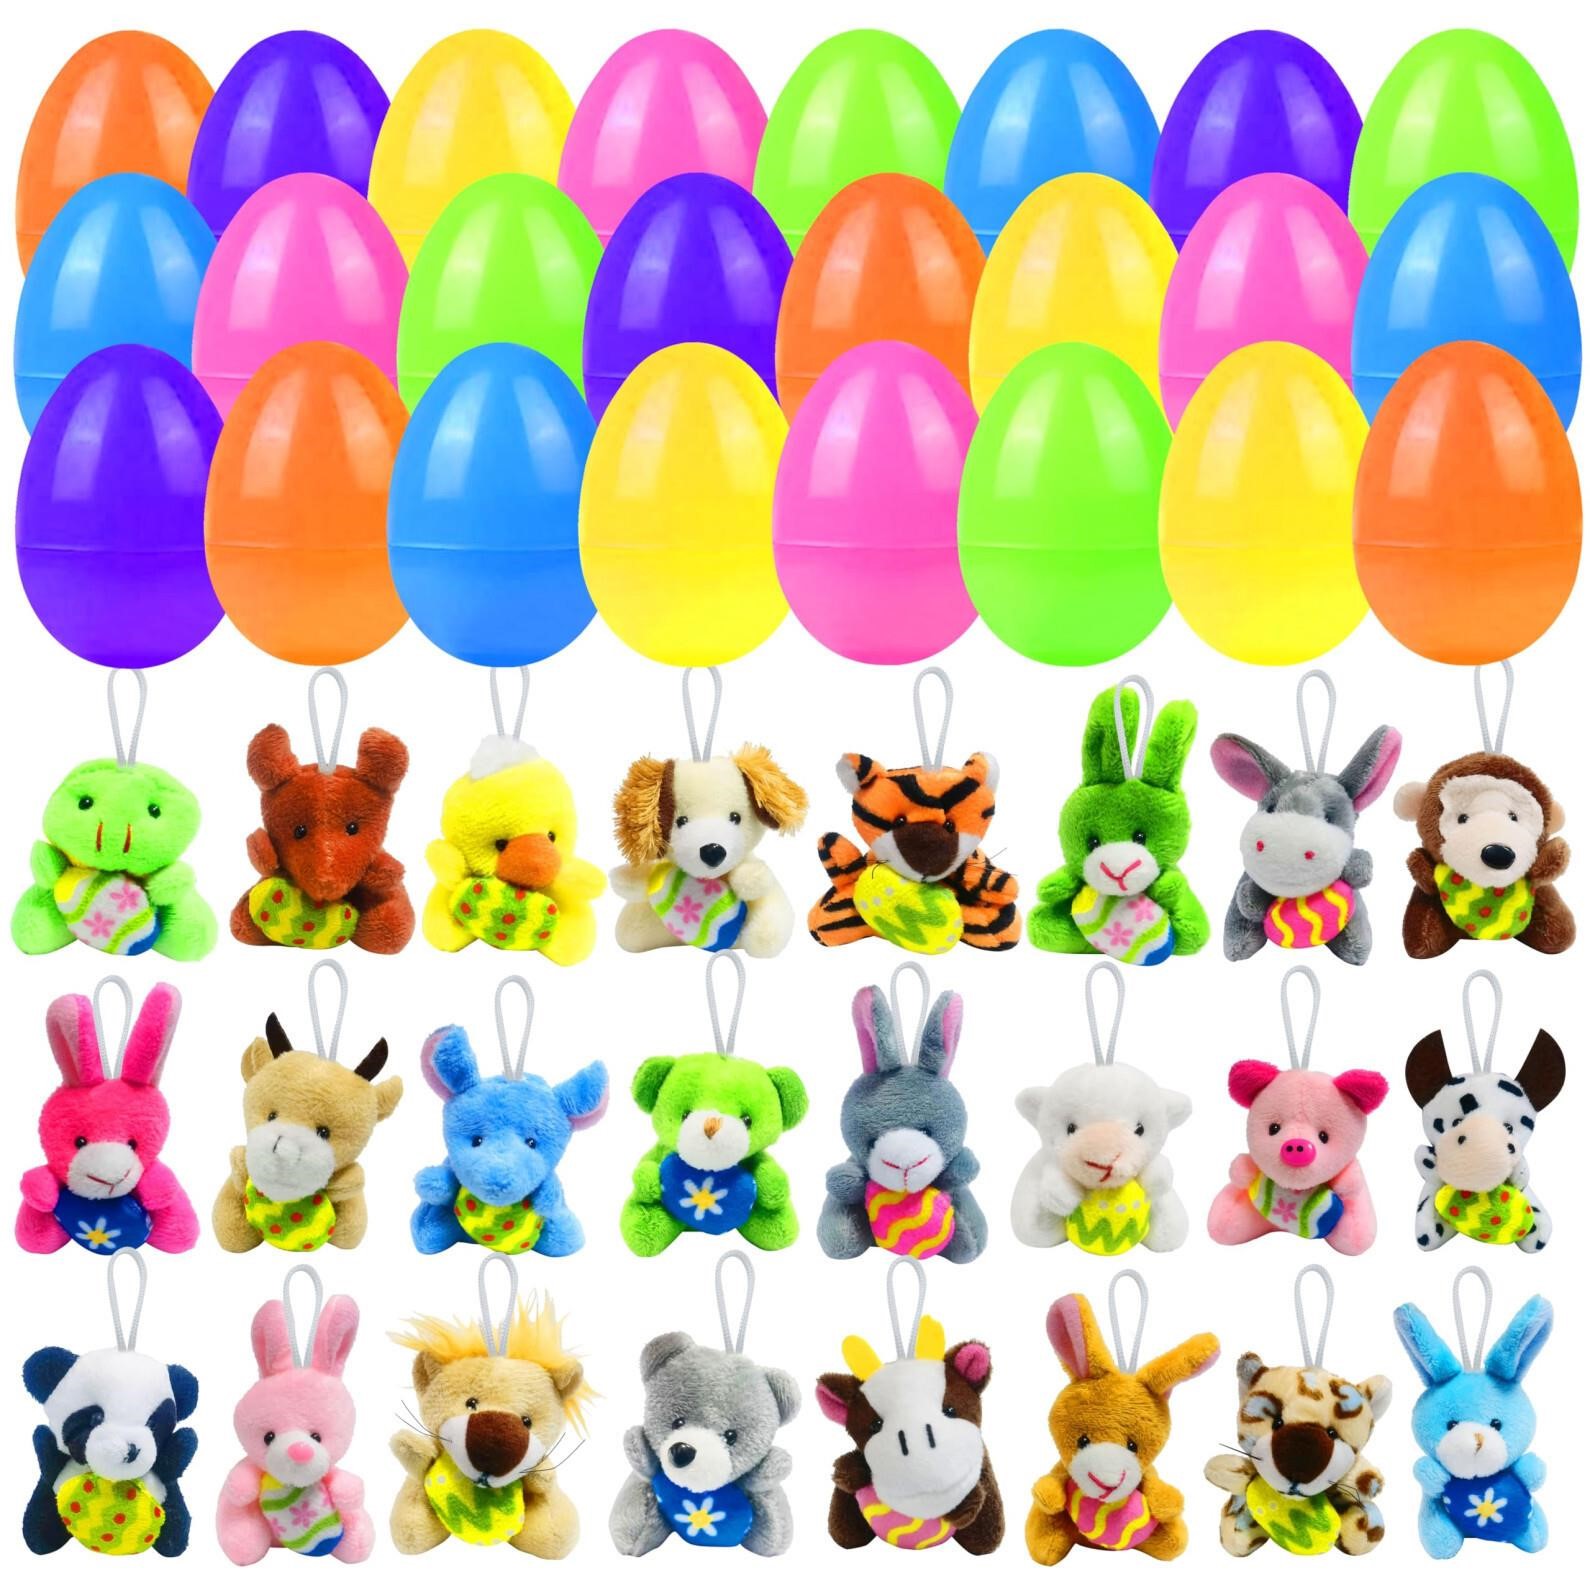 Holydeck 24 Pack Easter Eggs with Plush Toys Assor